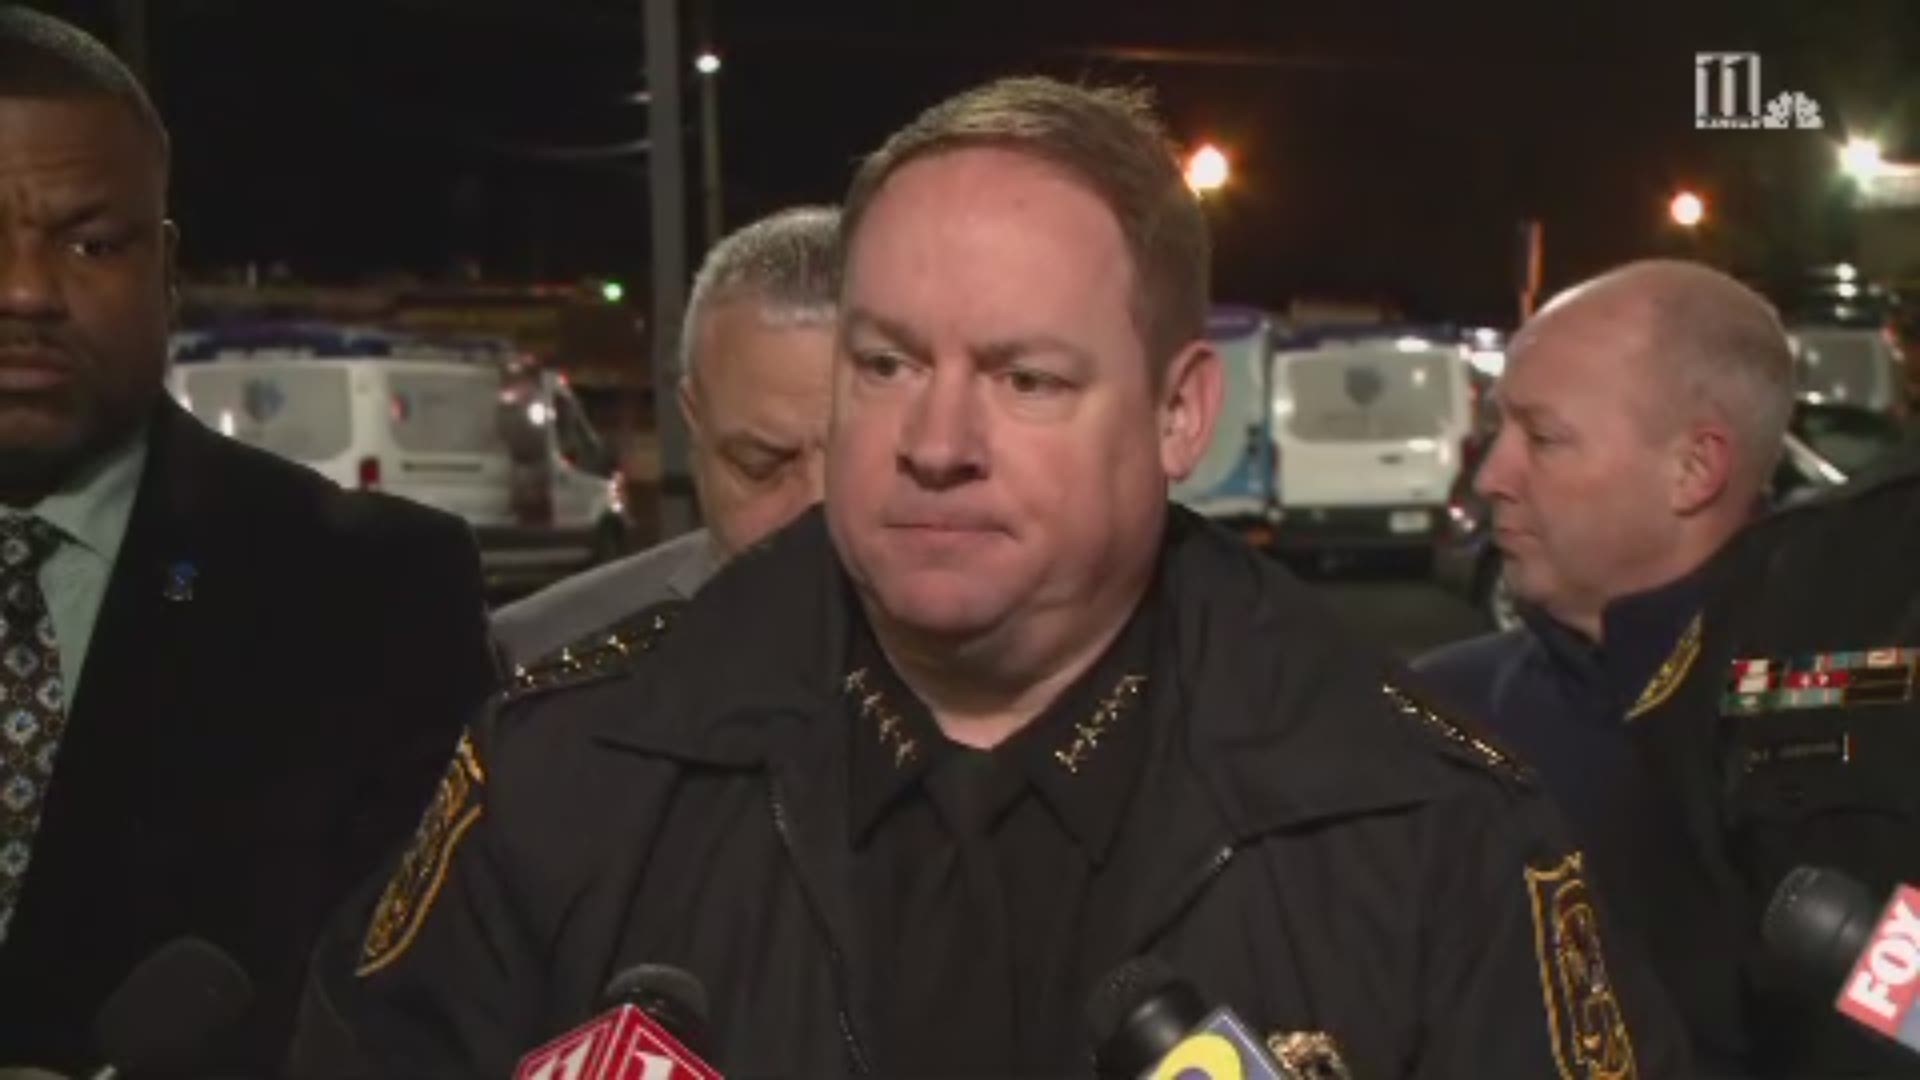 Police Chief James Conroy confirmed the death of one of his officers during an emotional press briefing Thursday night.